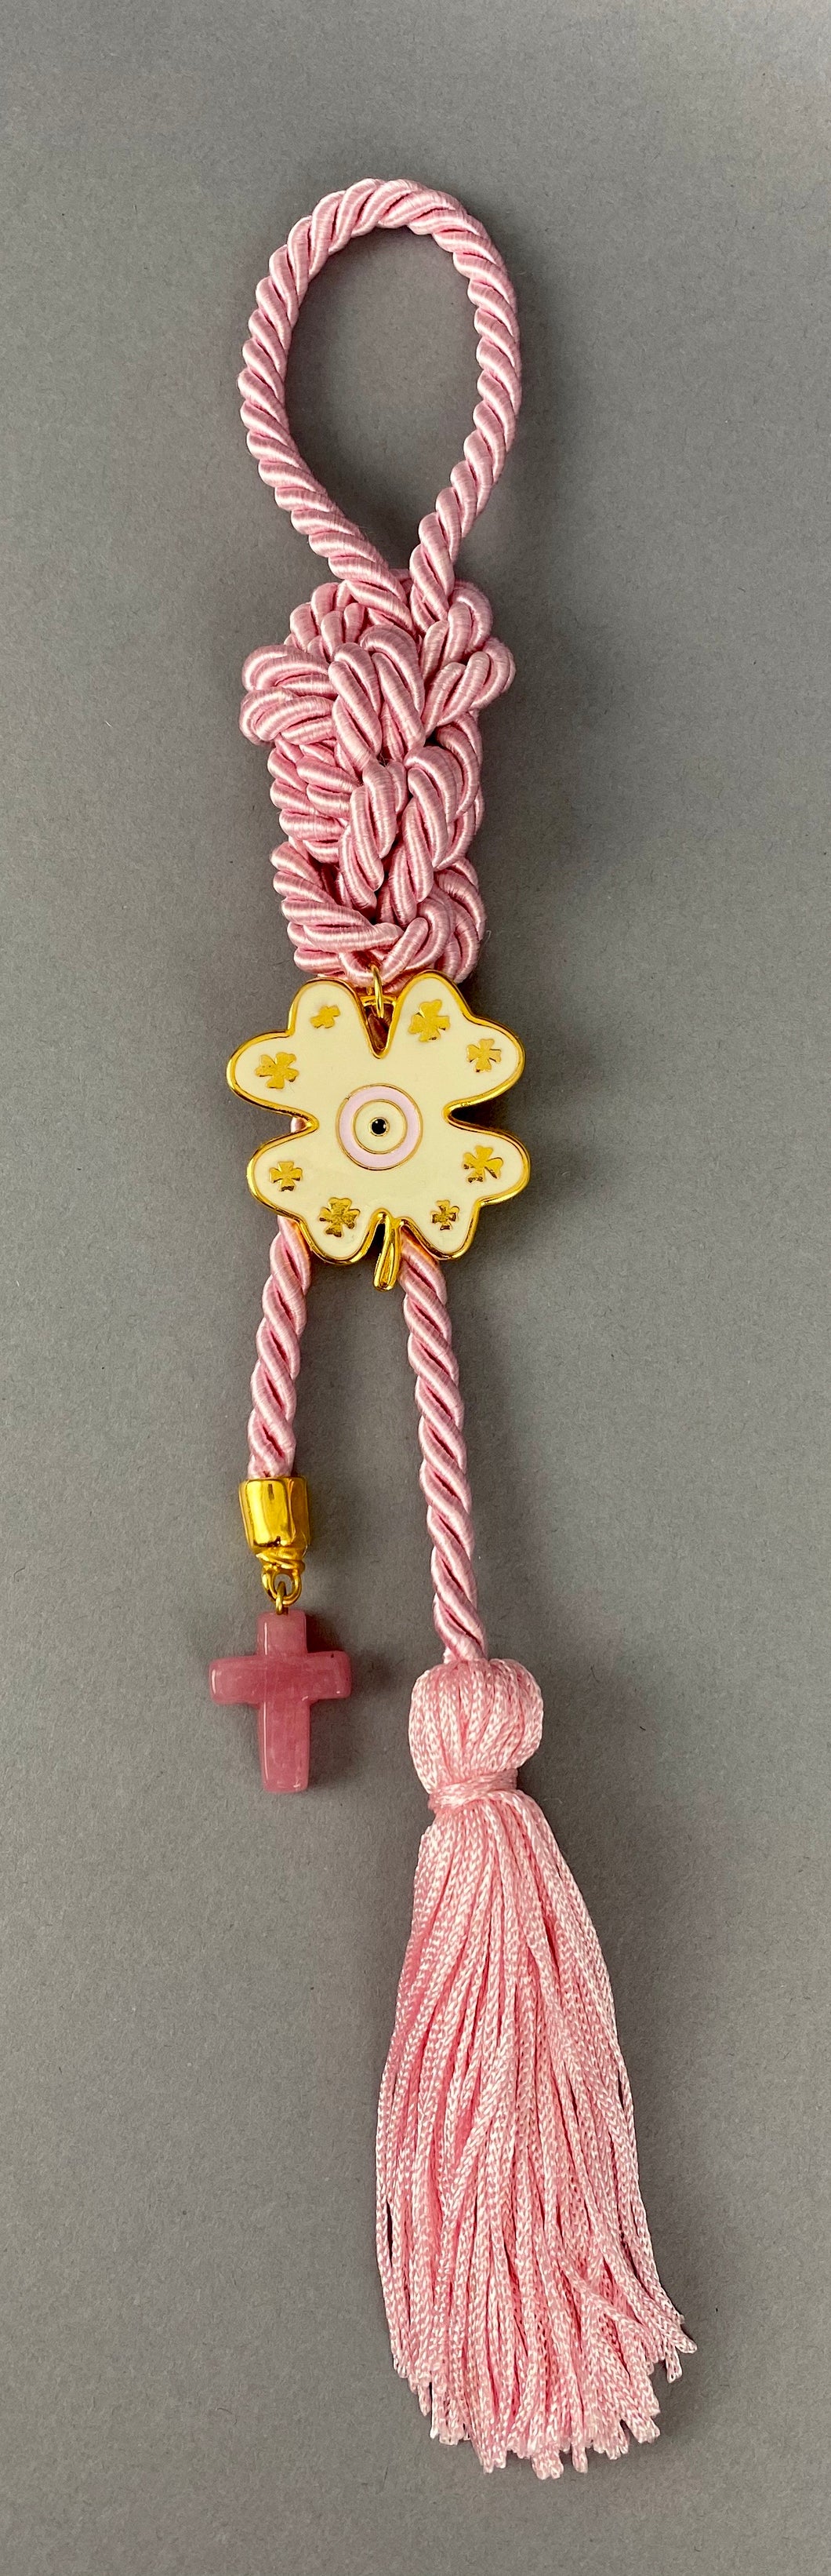 Gouri 1022 Pearl Pink  Cord Gouri, metal 4 leaf clover with Mati, glass cross with tassel.   Measures 13” in length.